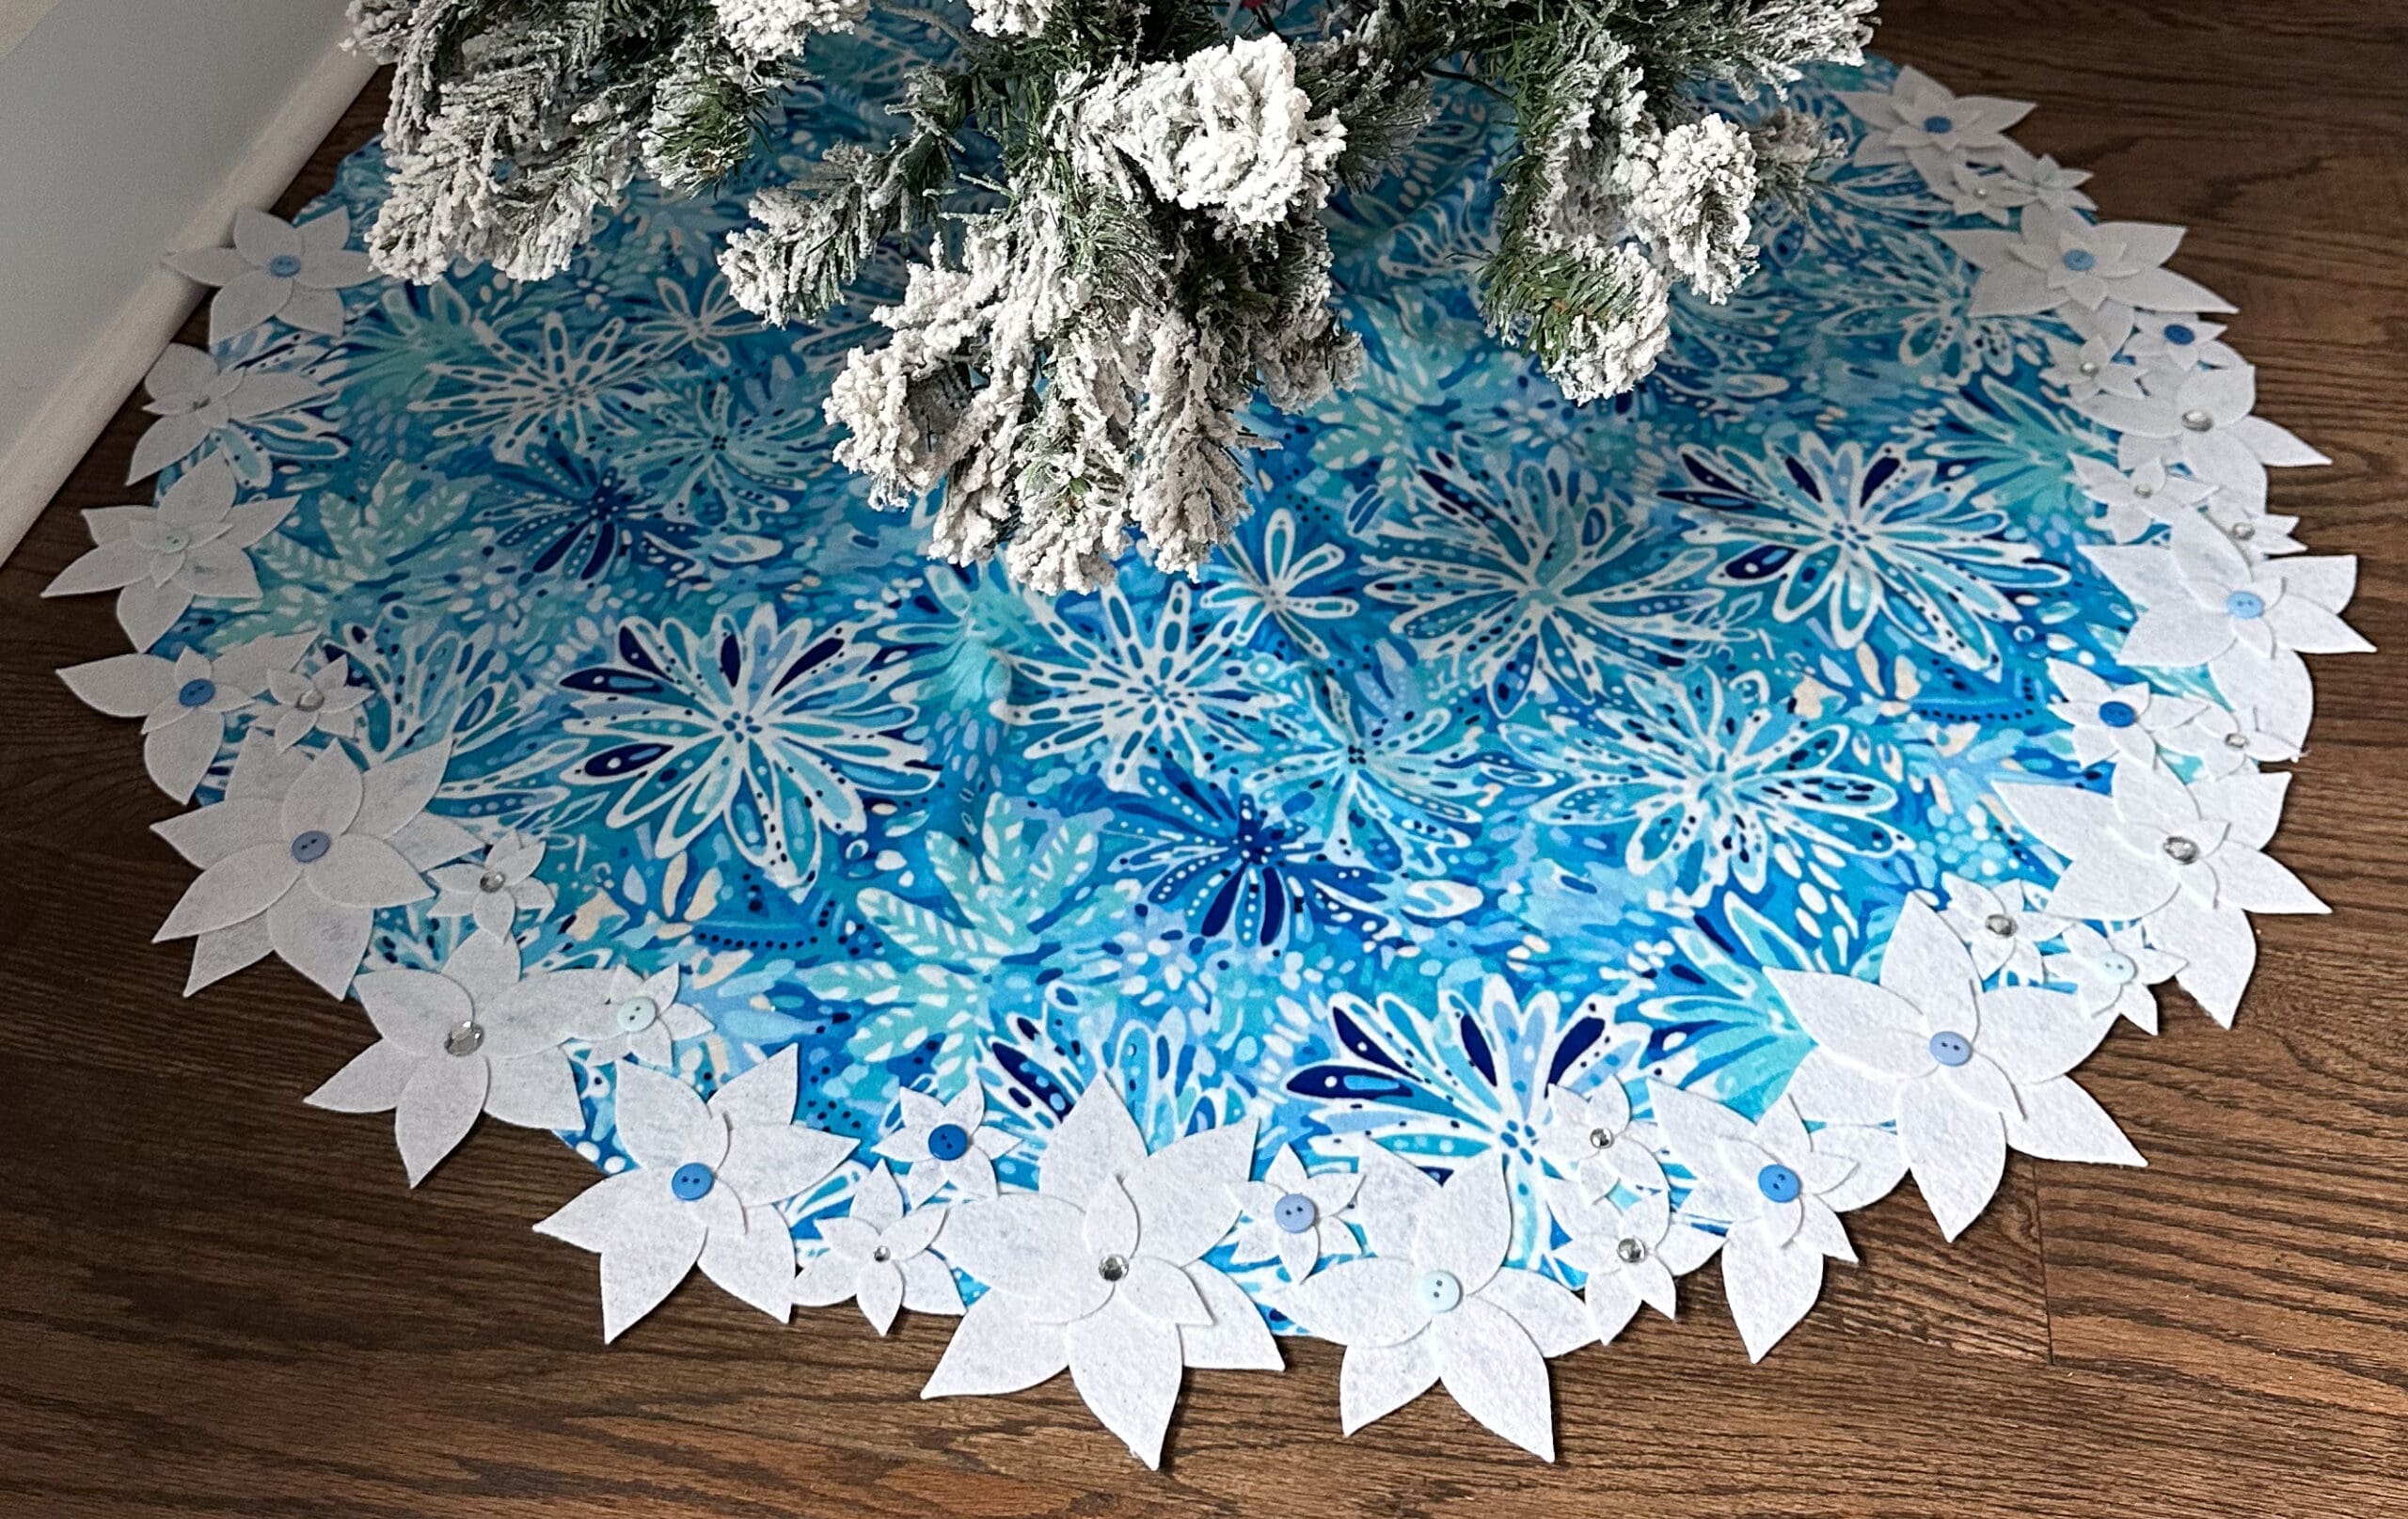 The Best Embellished DIY Tree Skirt Tutorial for Your Whimsical Winter Decor